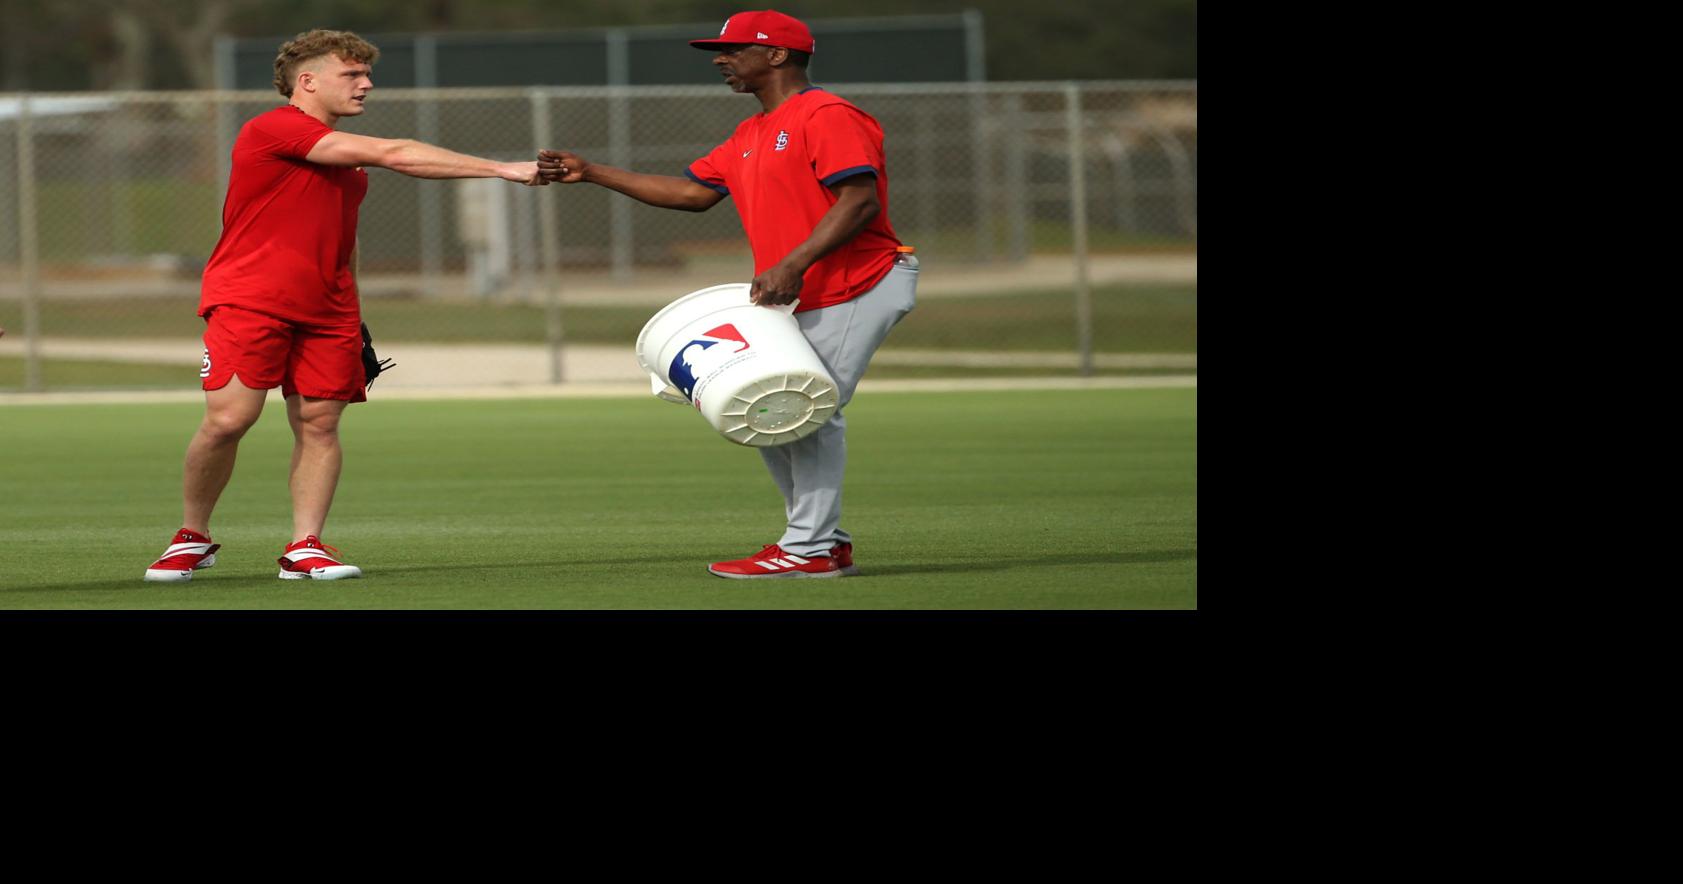 Willie McGee  boxing? It's part of his training routine during spring  break